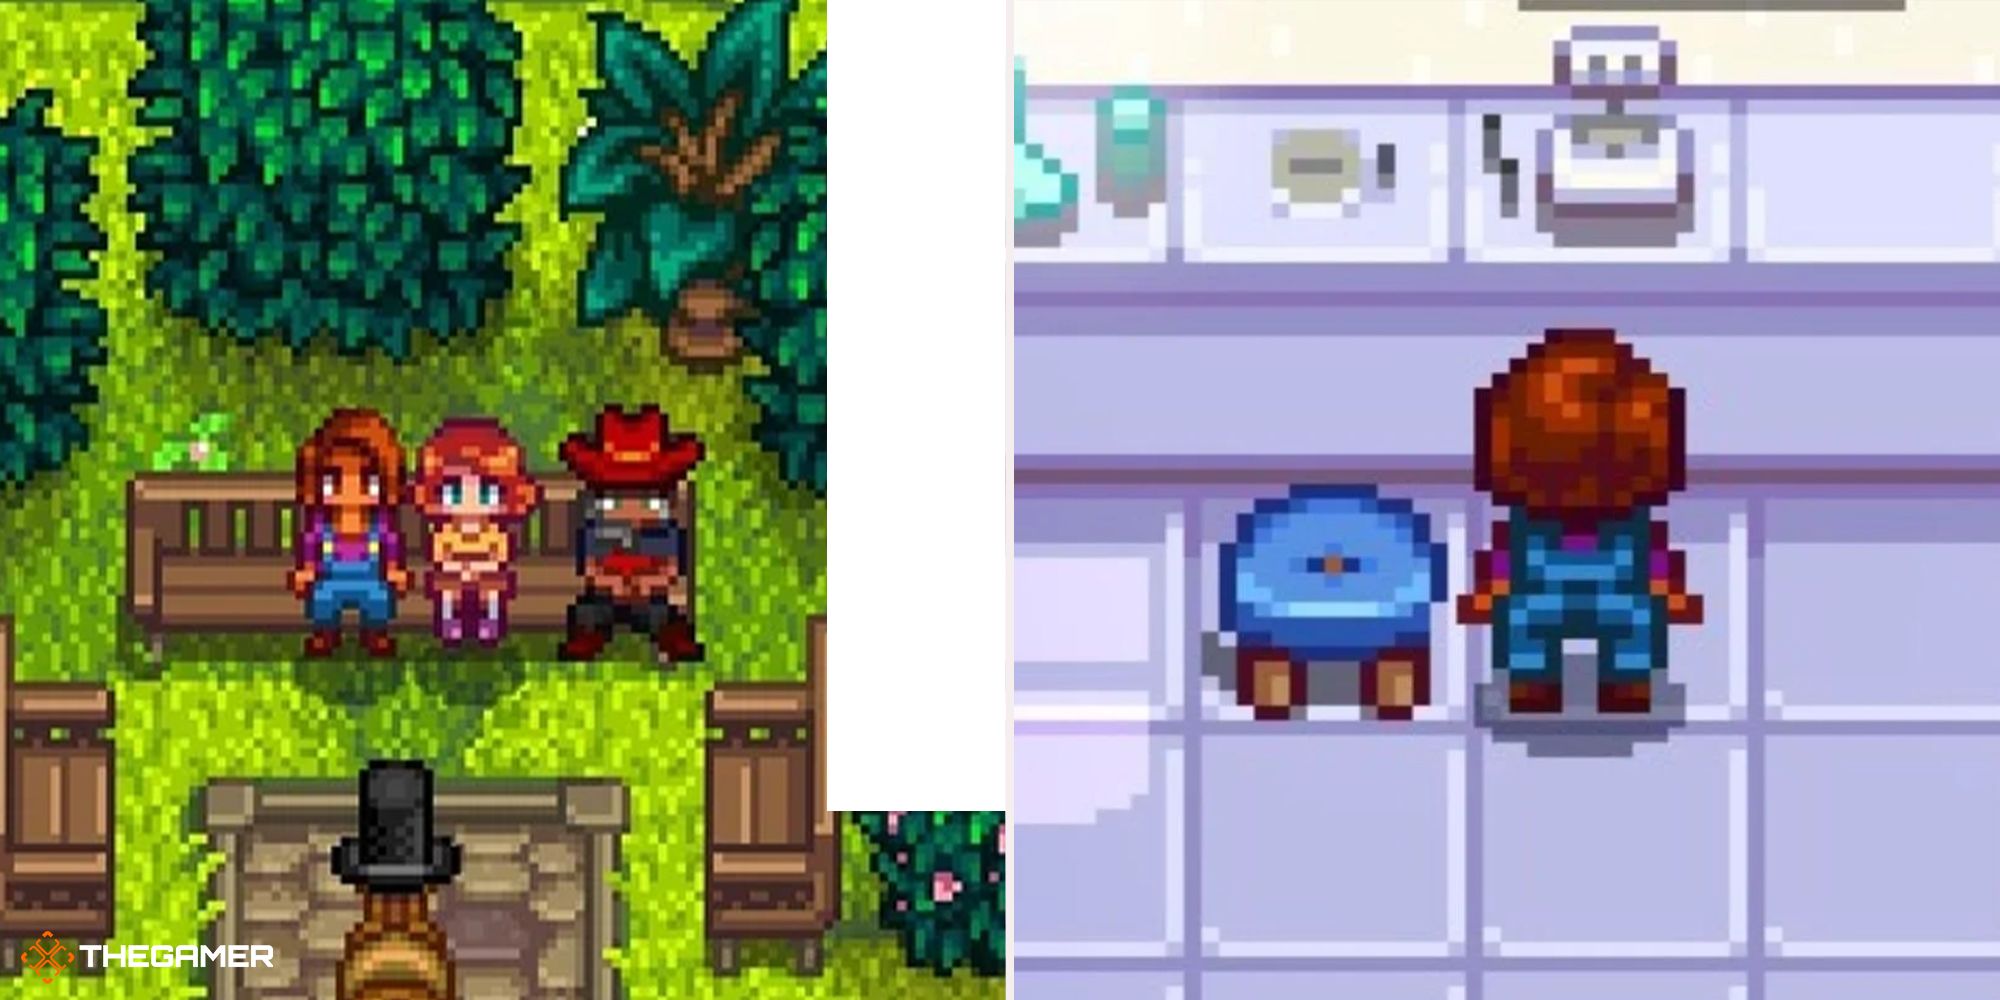 Stardew Valley - Maru and Penny (left), Maru in the lab (right)